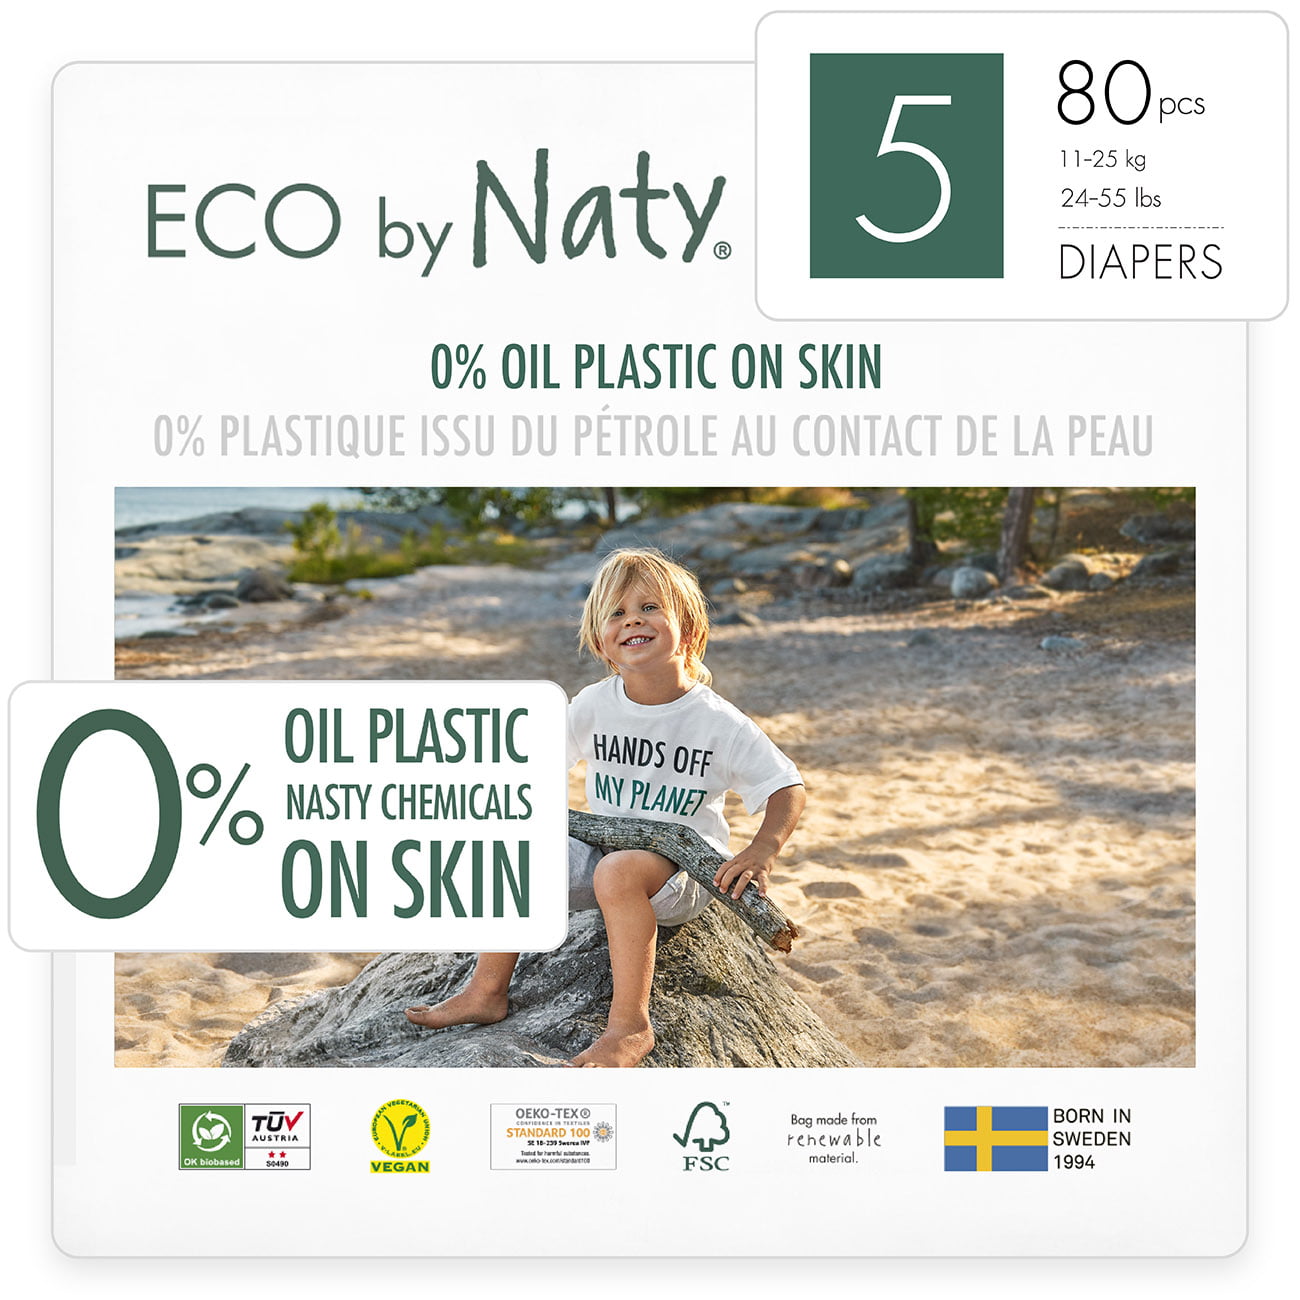 11-25 kg size 5 Eco by naty premium disposable diapers for sensitive skin 1 pack of 22